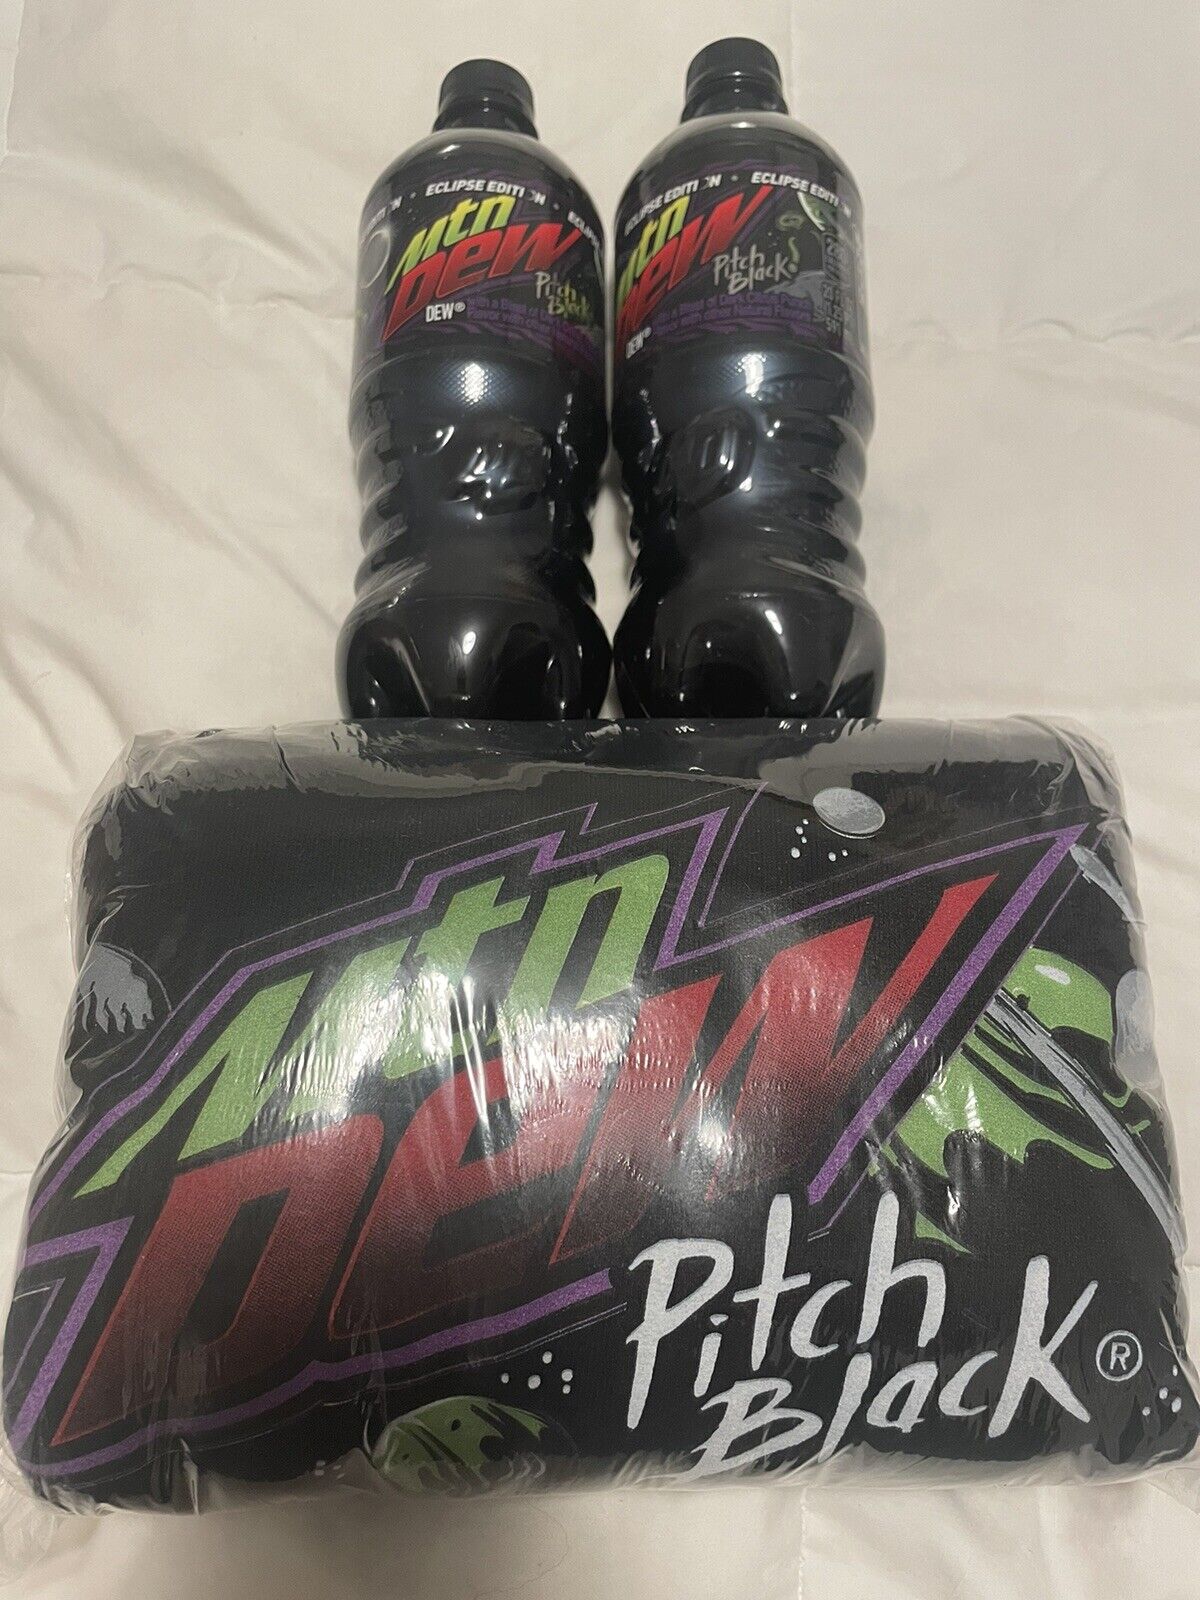 MTN DEW Pitch Black LIMITED EDITION Solar Eclipse 2 bottles & Hoodie 